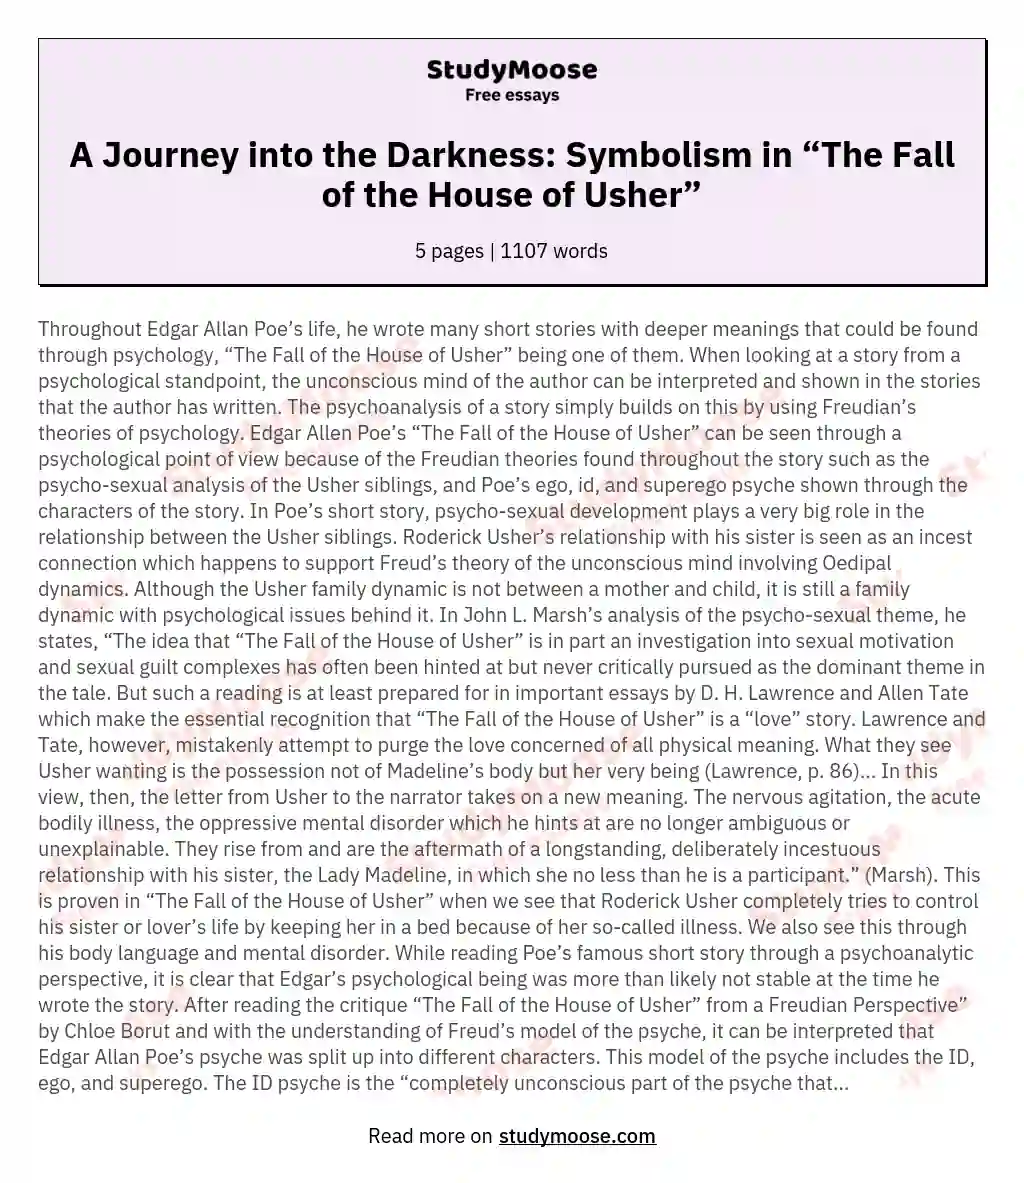 A Journey into the Darkness: Symbolism in “The Fall of the House of Usher”